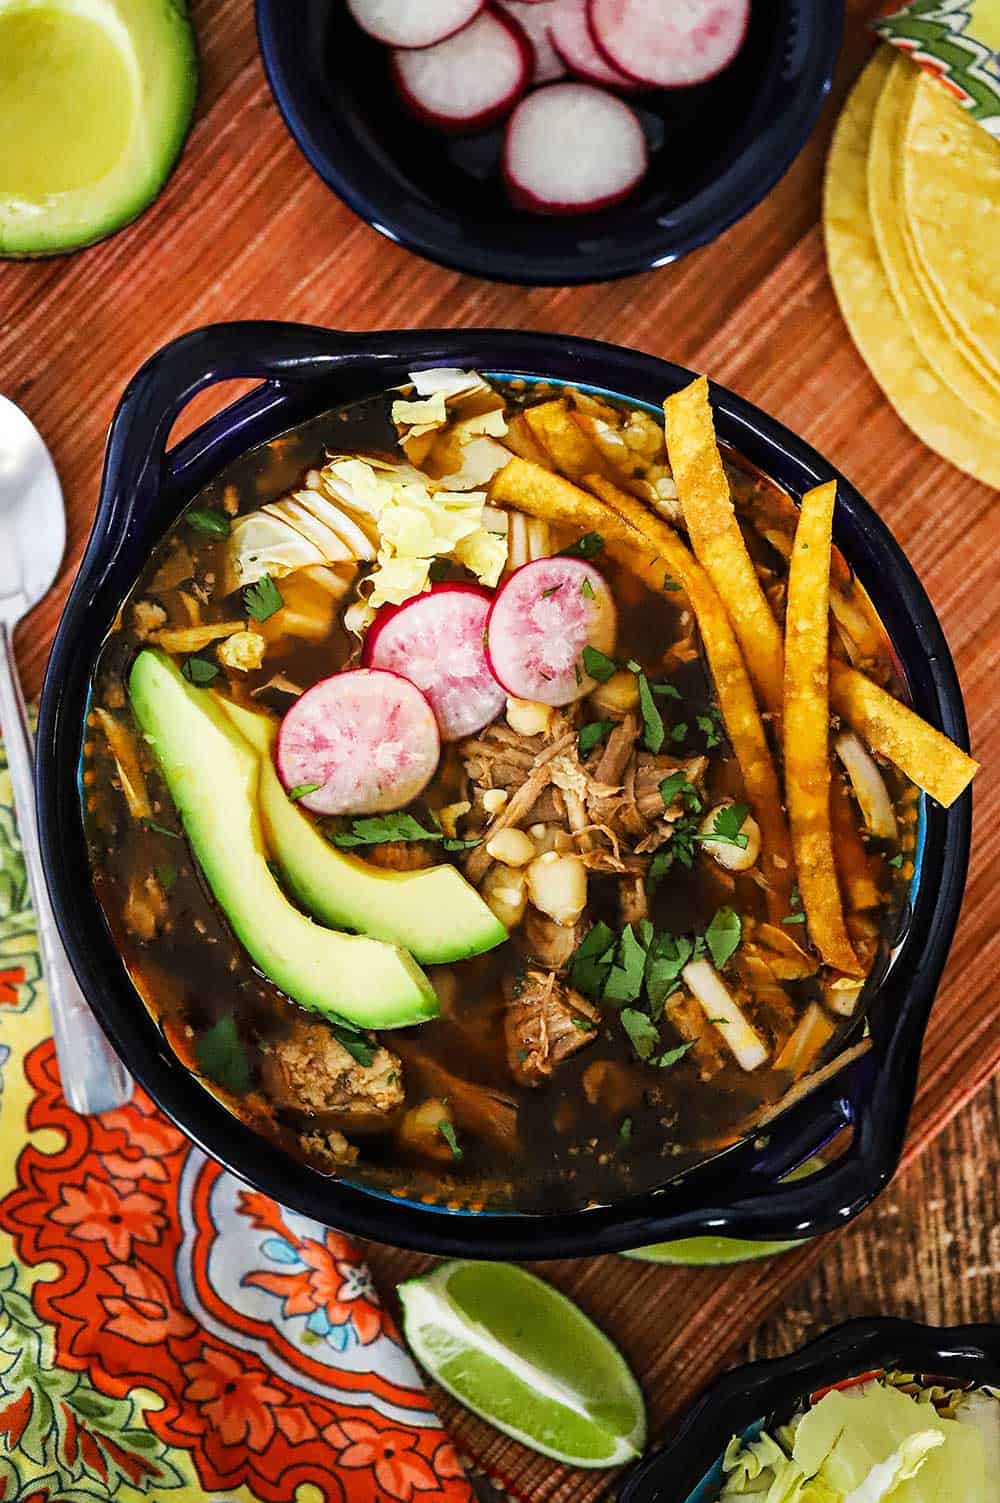 A colorful Mexican bowl filled with Mexican pozole stew surrounded by bowls of sliced radishes, cabbage, avocados, and corn tortillas.